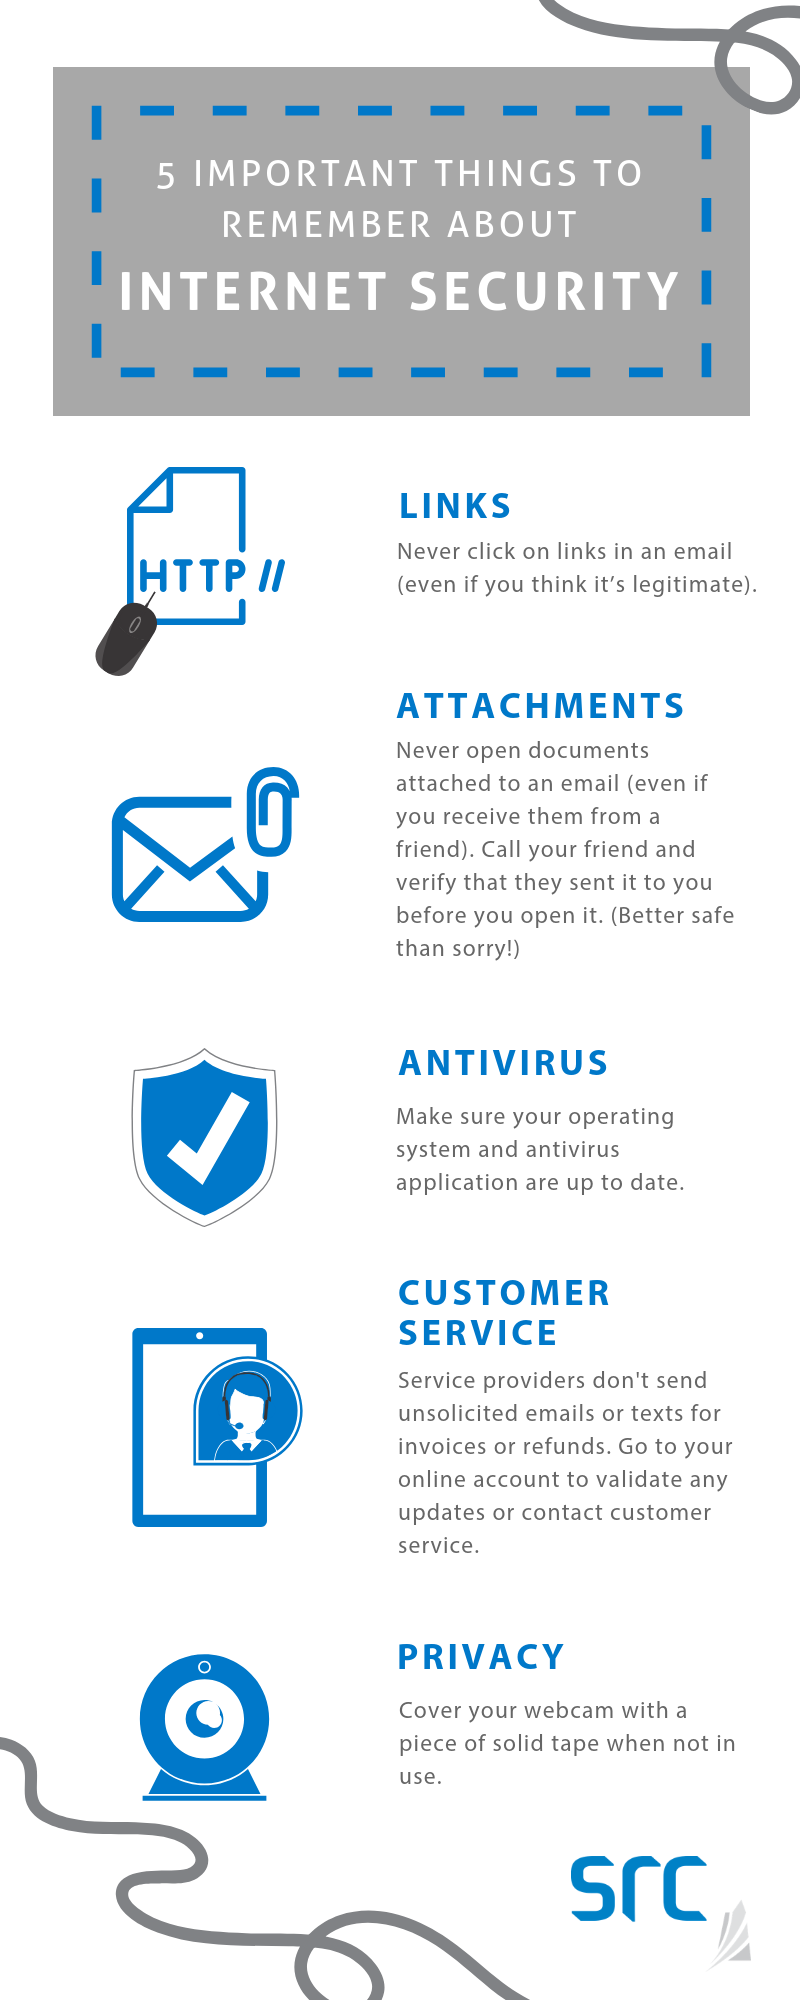 src five things to remember about internet security infographic